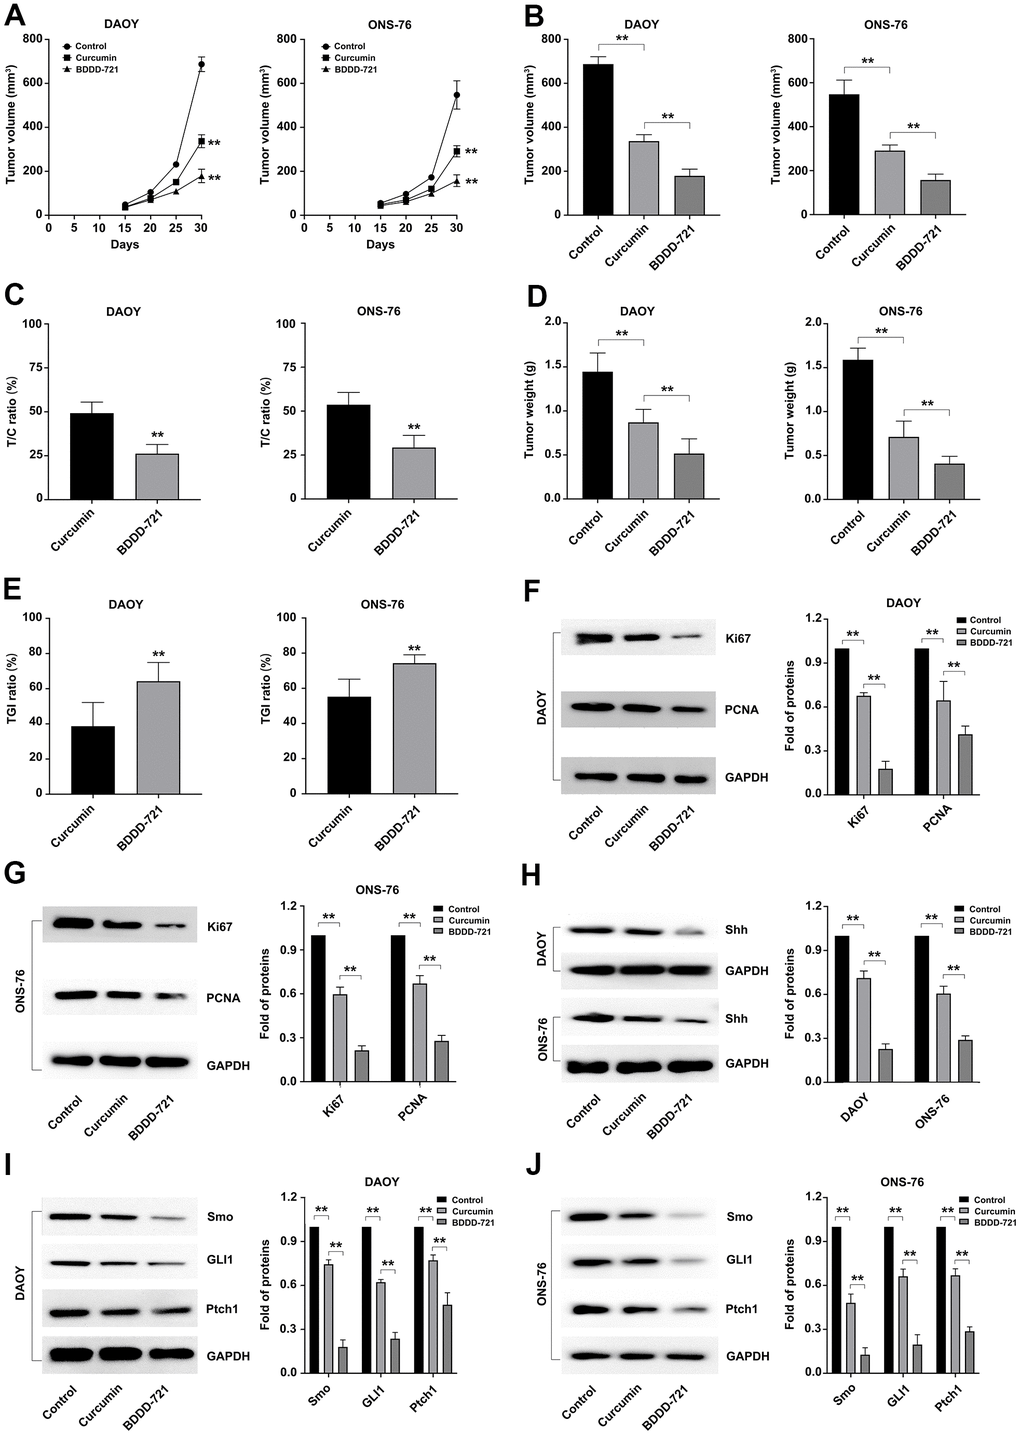 Effects of curcumin and BDDD-721 against medulloblastoma cells in vivo. (A) The tumor volume of xenografts was recorded after curcumin and BDDD-721 treatment. (B) The difference of the final median tumor volume between curcumin and BDDD-721 treatment was analyzed by SPSS statistical software. (C) T/C (%) was calculated and analyzed after curcumin and BDDD-721 treatment. (D) The difference of the final weight of transplanted tumor between curcumin and BDDD-721 treatment was analyzed by SPSS statistical software. (E) TGI(%) was calculated and analyzed after curcumin and BDDD-721 treatment. Then, the expression of Ki67 and PCNA proteins were detected by western blot in DAOY (F) and ONS-76 (G) xenografts. (H) Shh protein was detected by western blot in DAOY and ONS-76 xenografts. And the expression of Smo, GLI1 and Ptch1 proteins were detected by western blot in DAOY (I) and ONS-76 (J) xenografts.